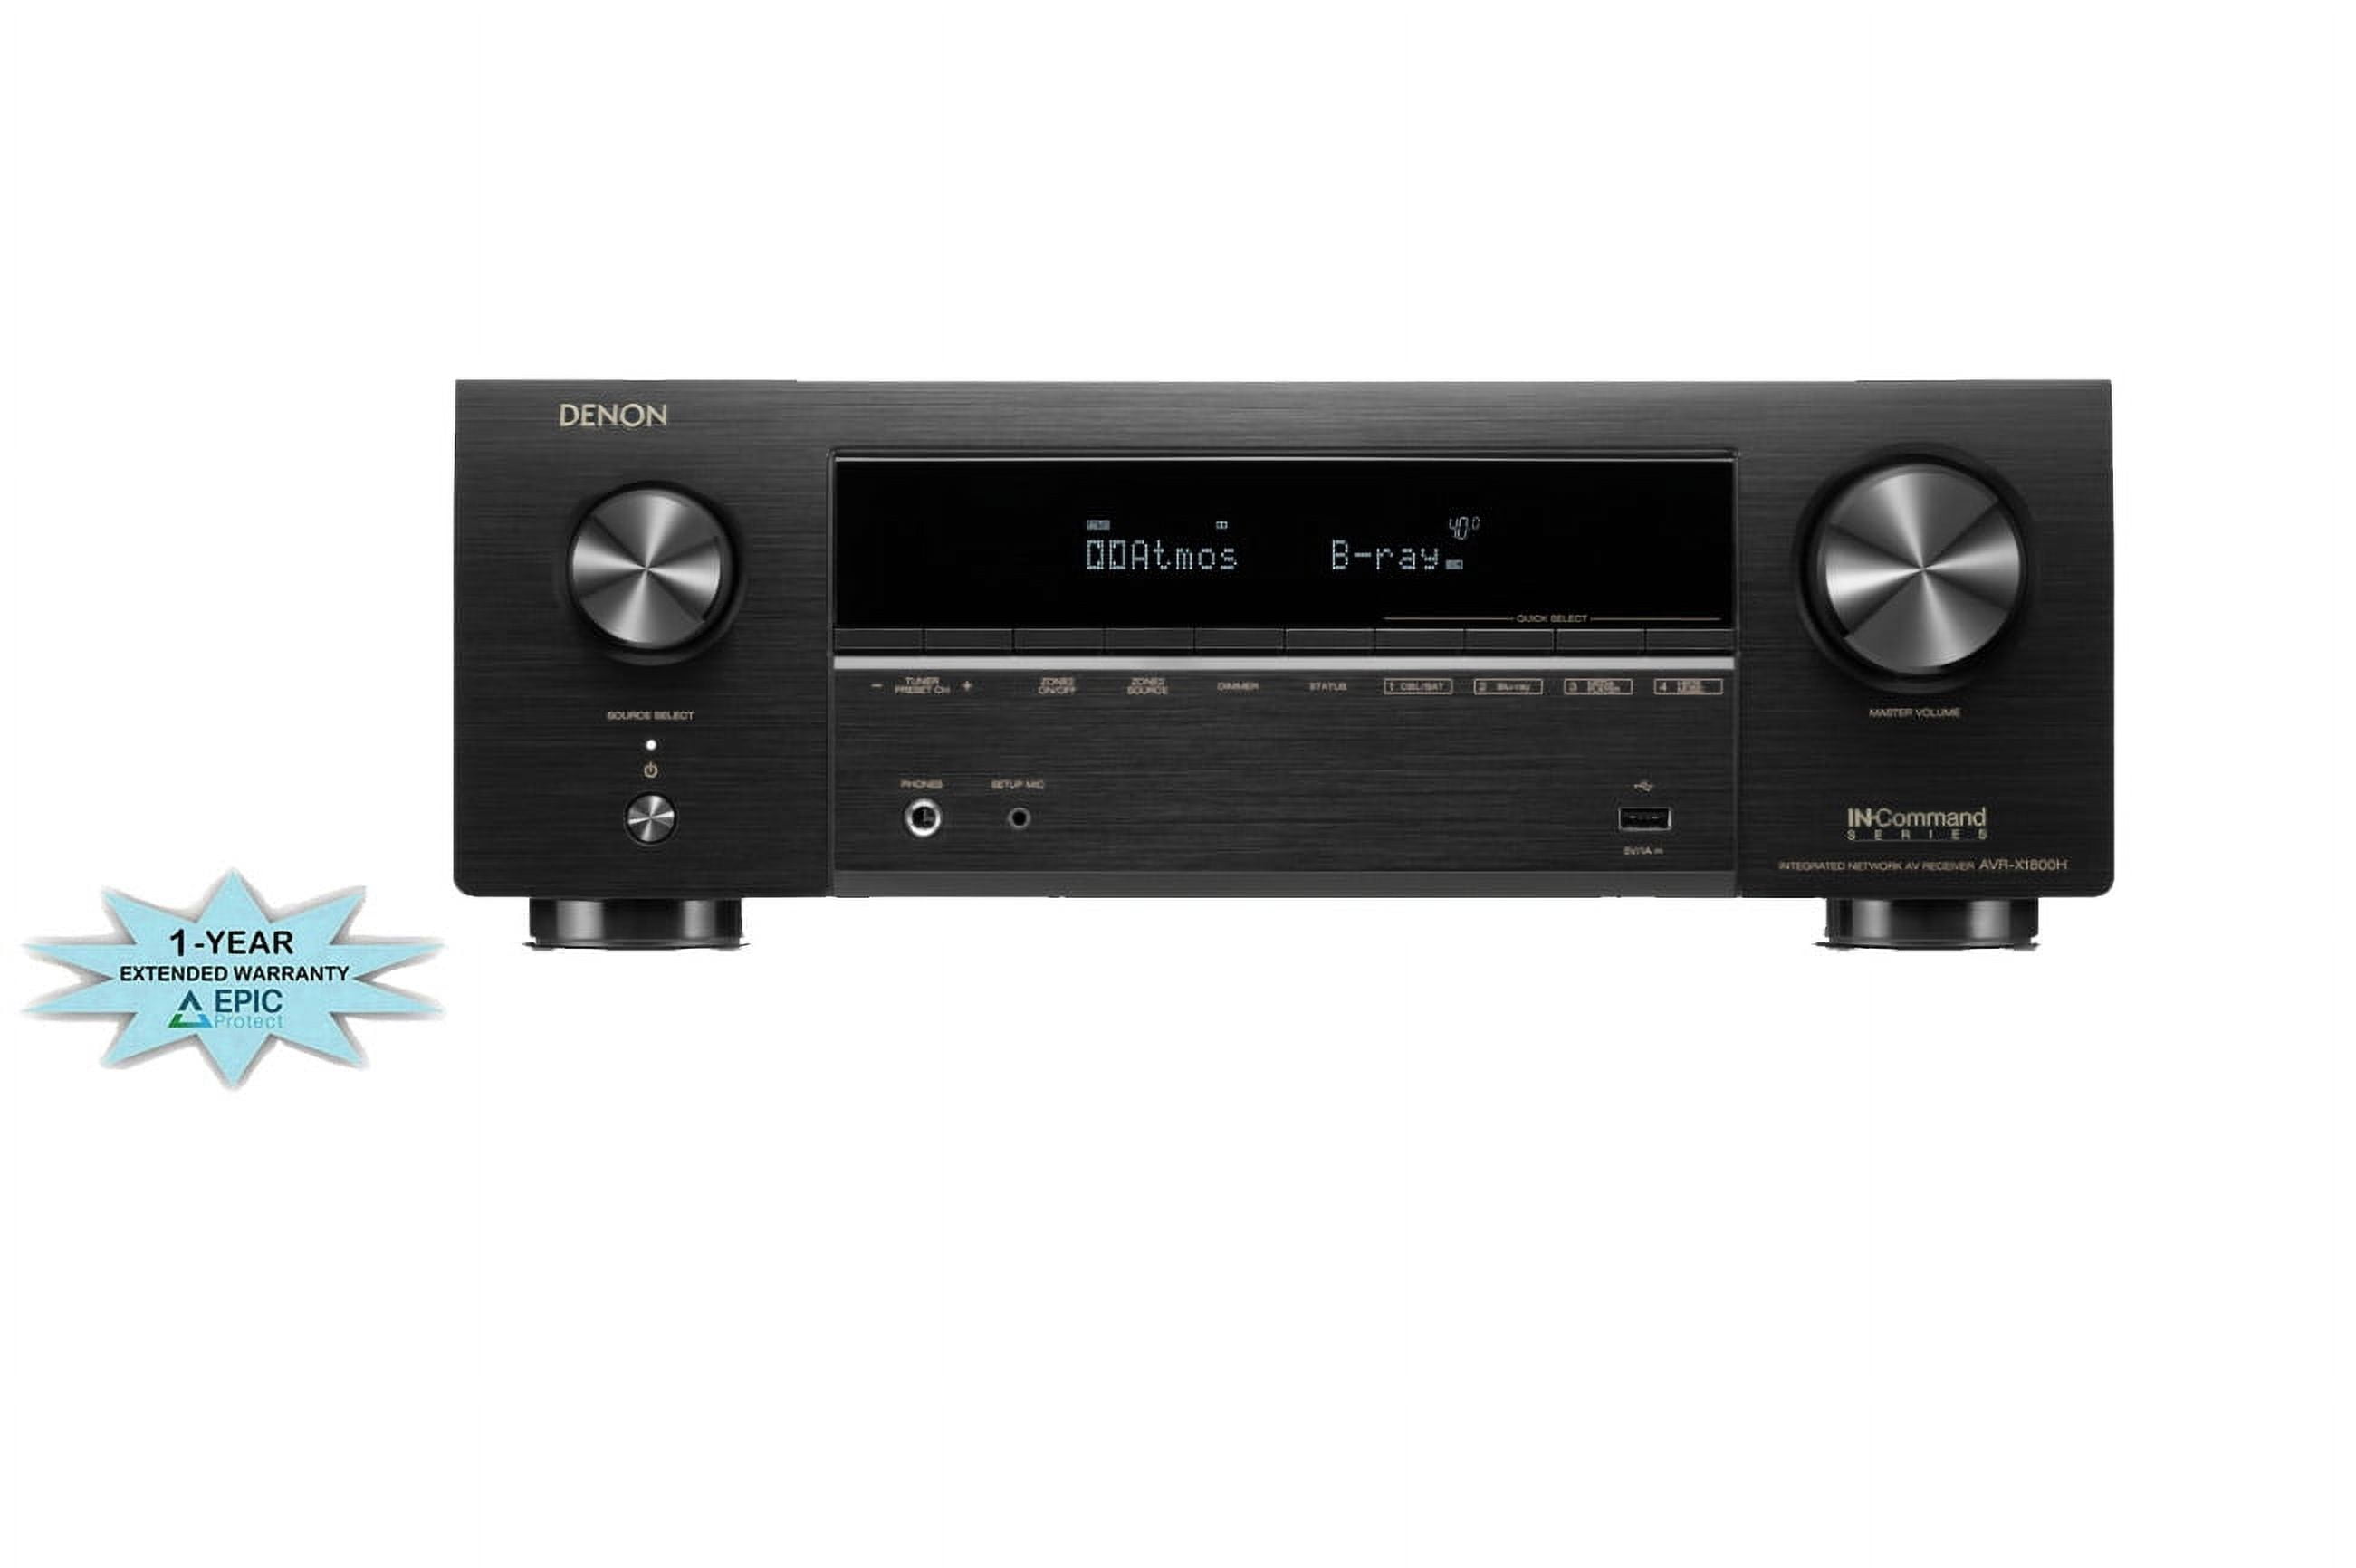 2.1 AV with Denon DRA-900H Channel Built-In Stereo 8K HEOS Receiver